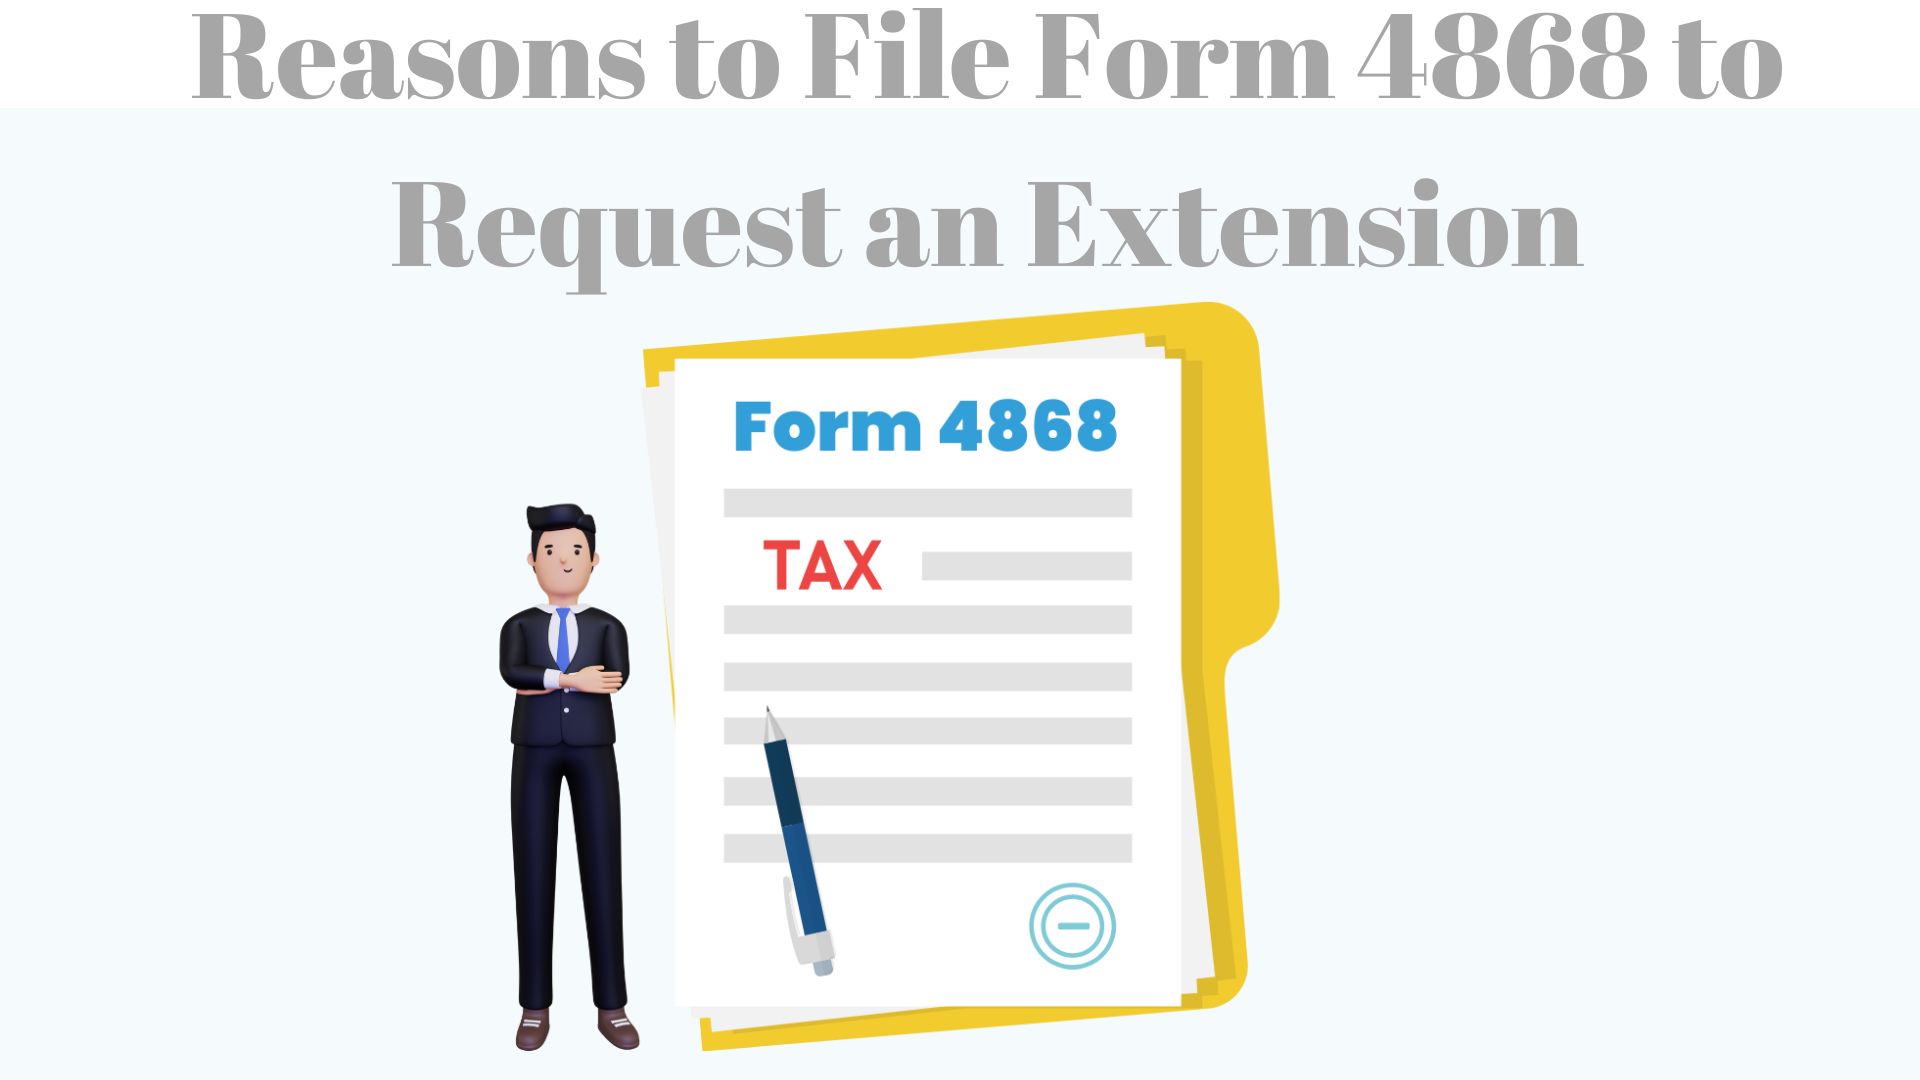 Reasons to File Form 4868 to Request an Extension